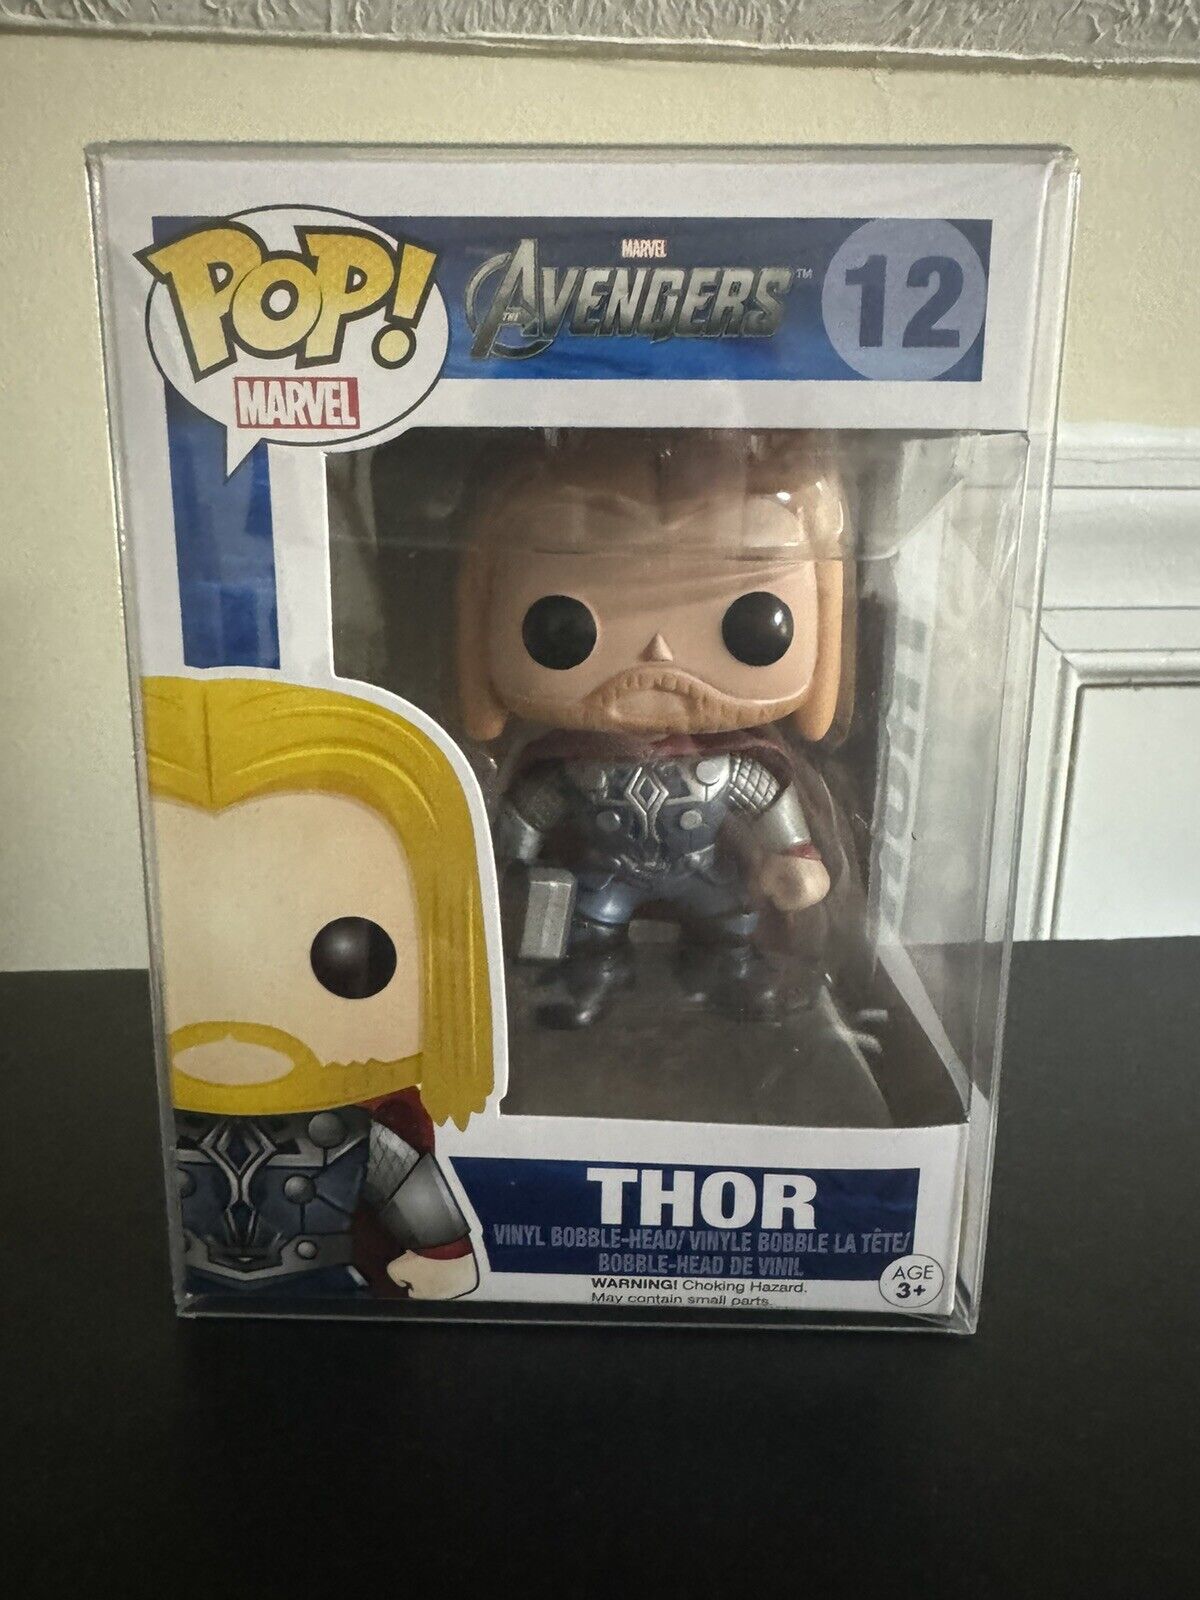 Thor Avengers Funko Pop 12 in Protector